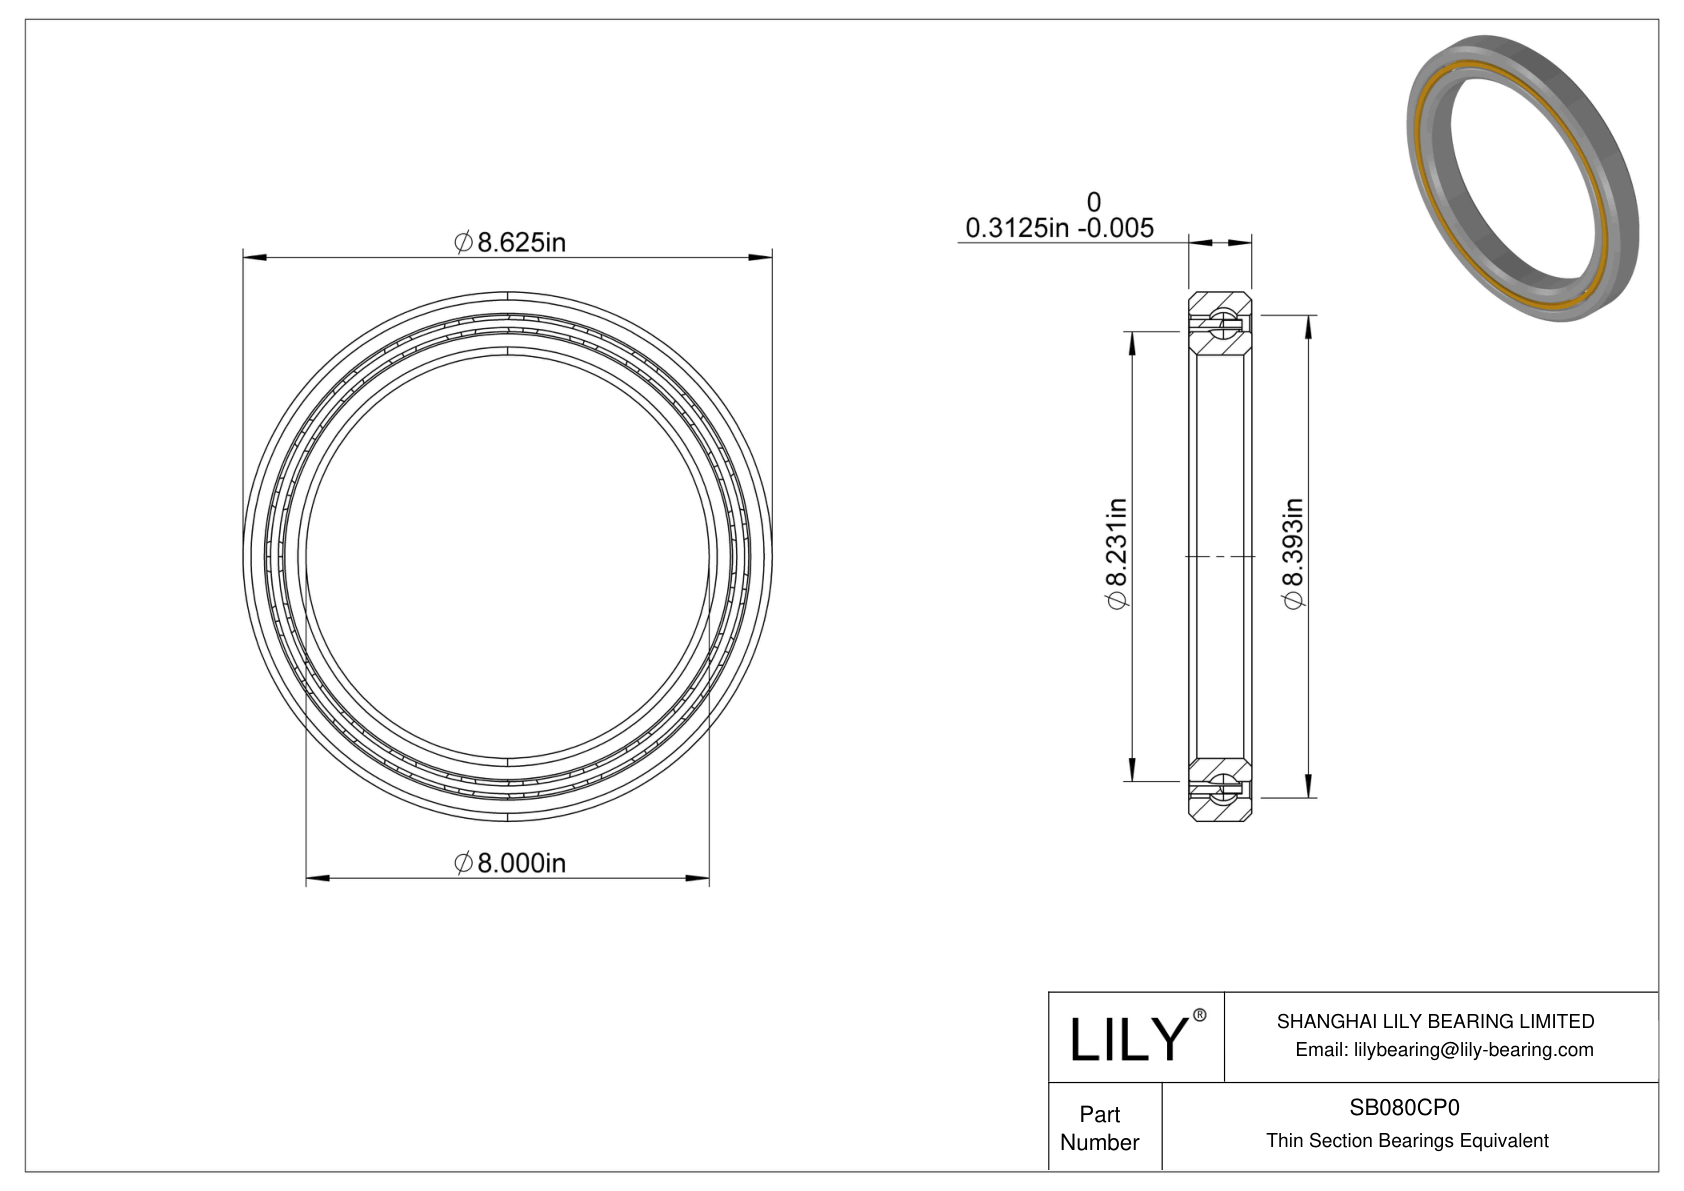 SB080CP0 Constant Section (CS) Bearings cad drawing